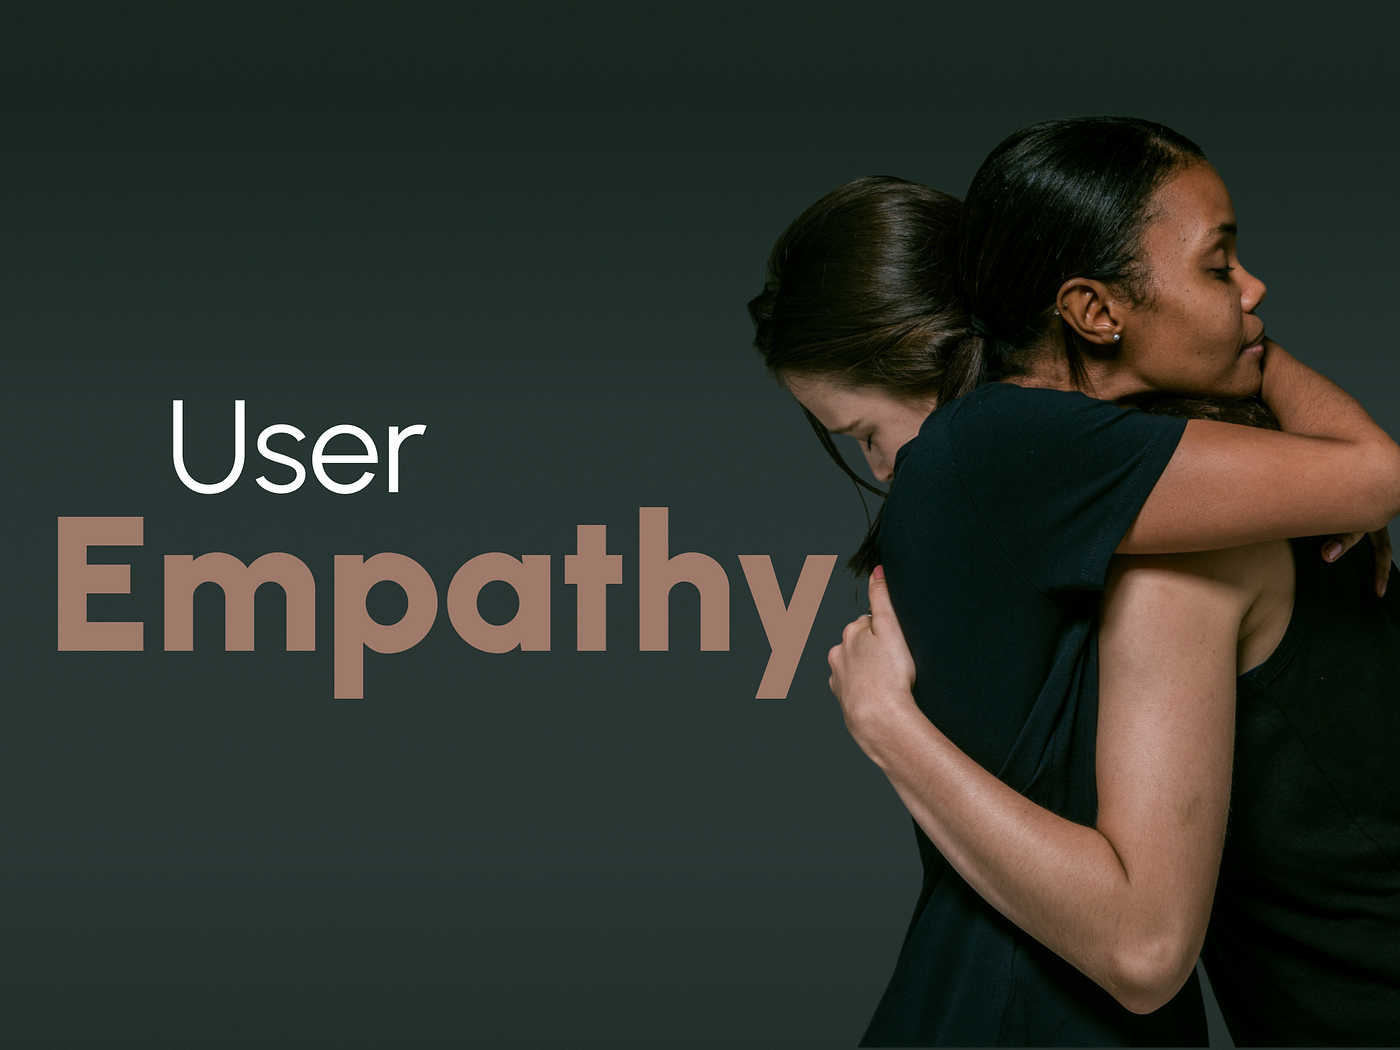 The importance of designing with empathy, t ad studio